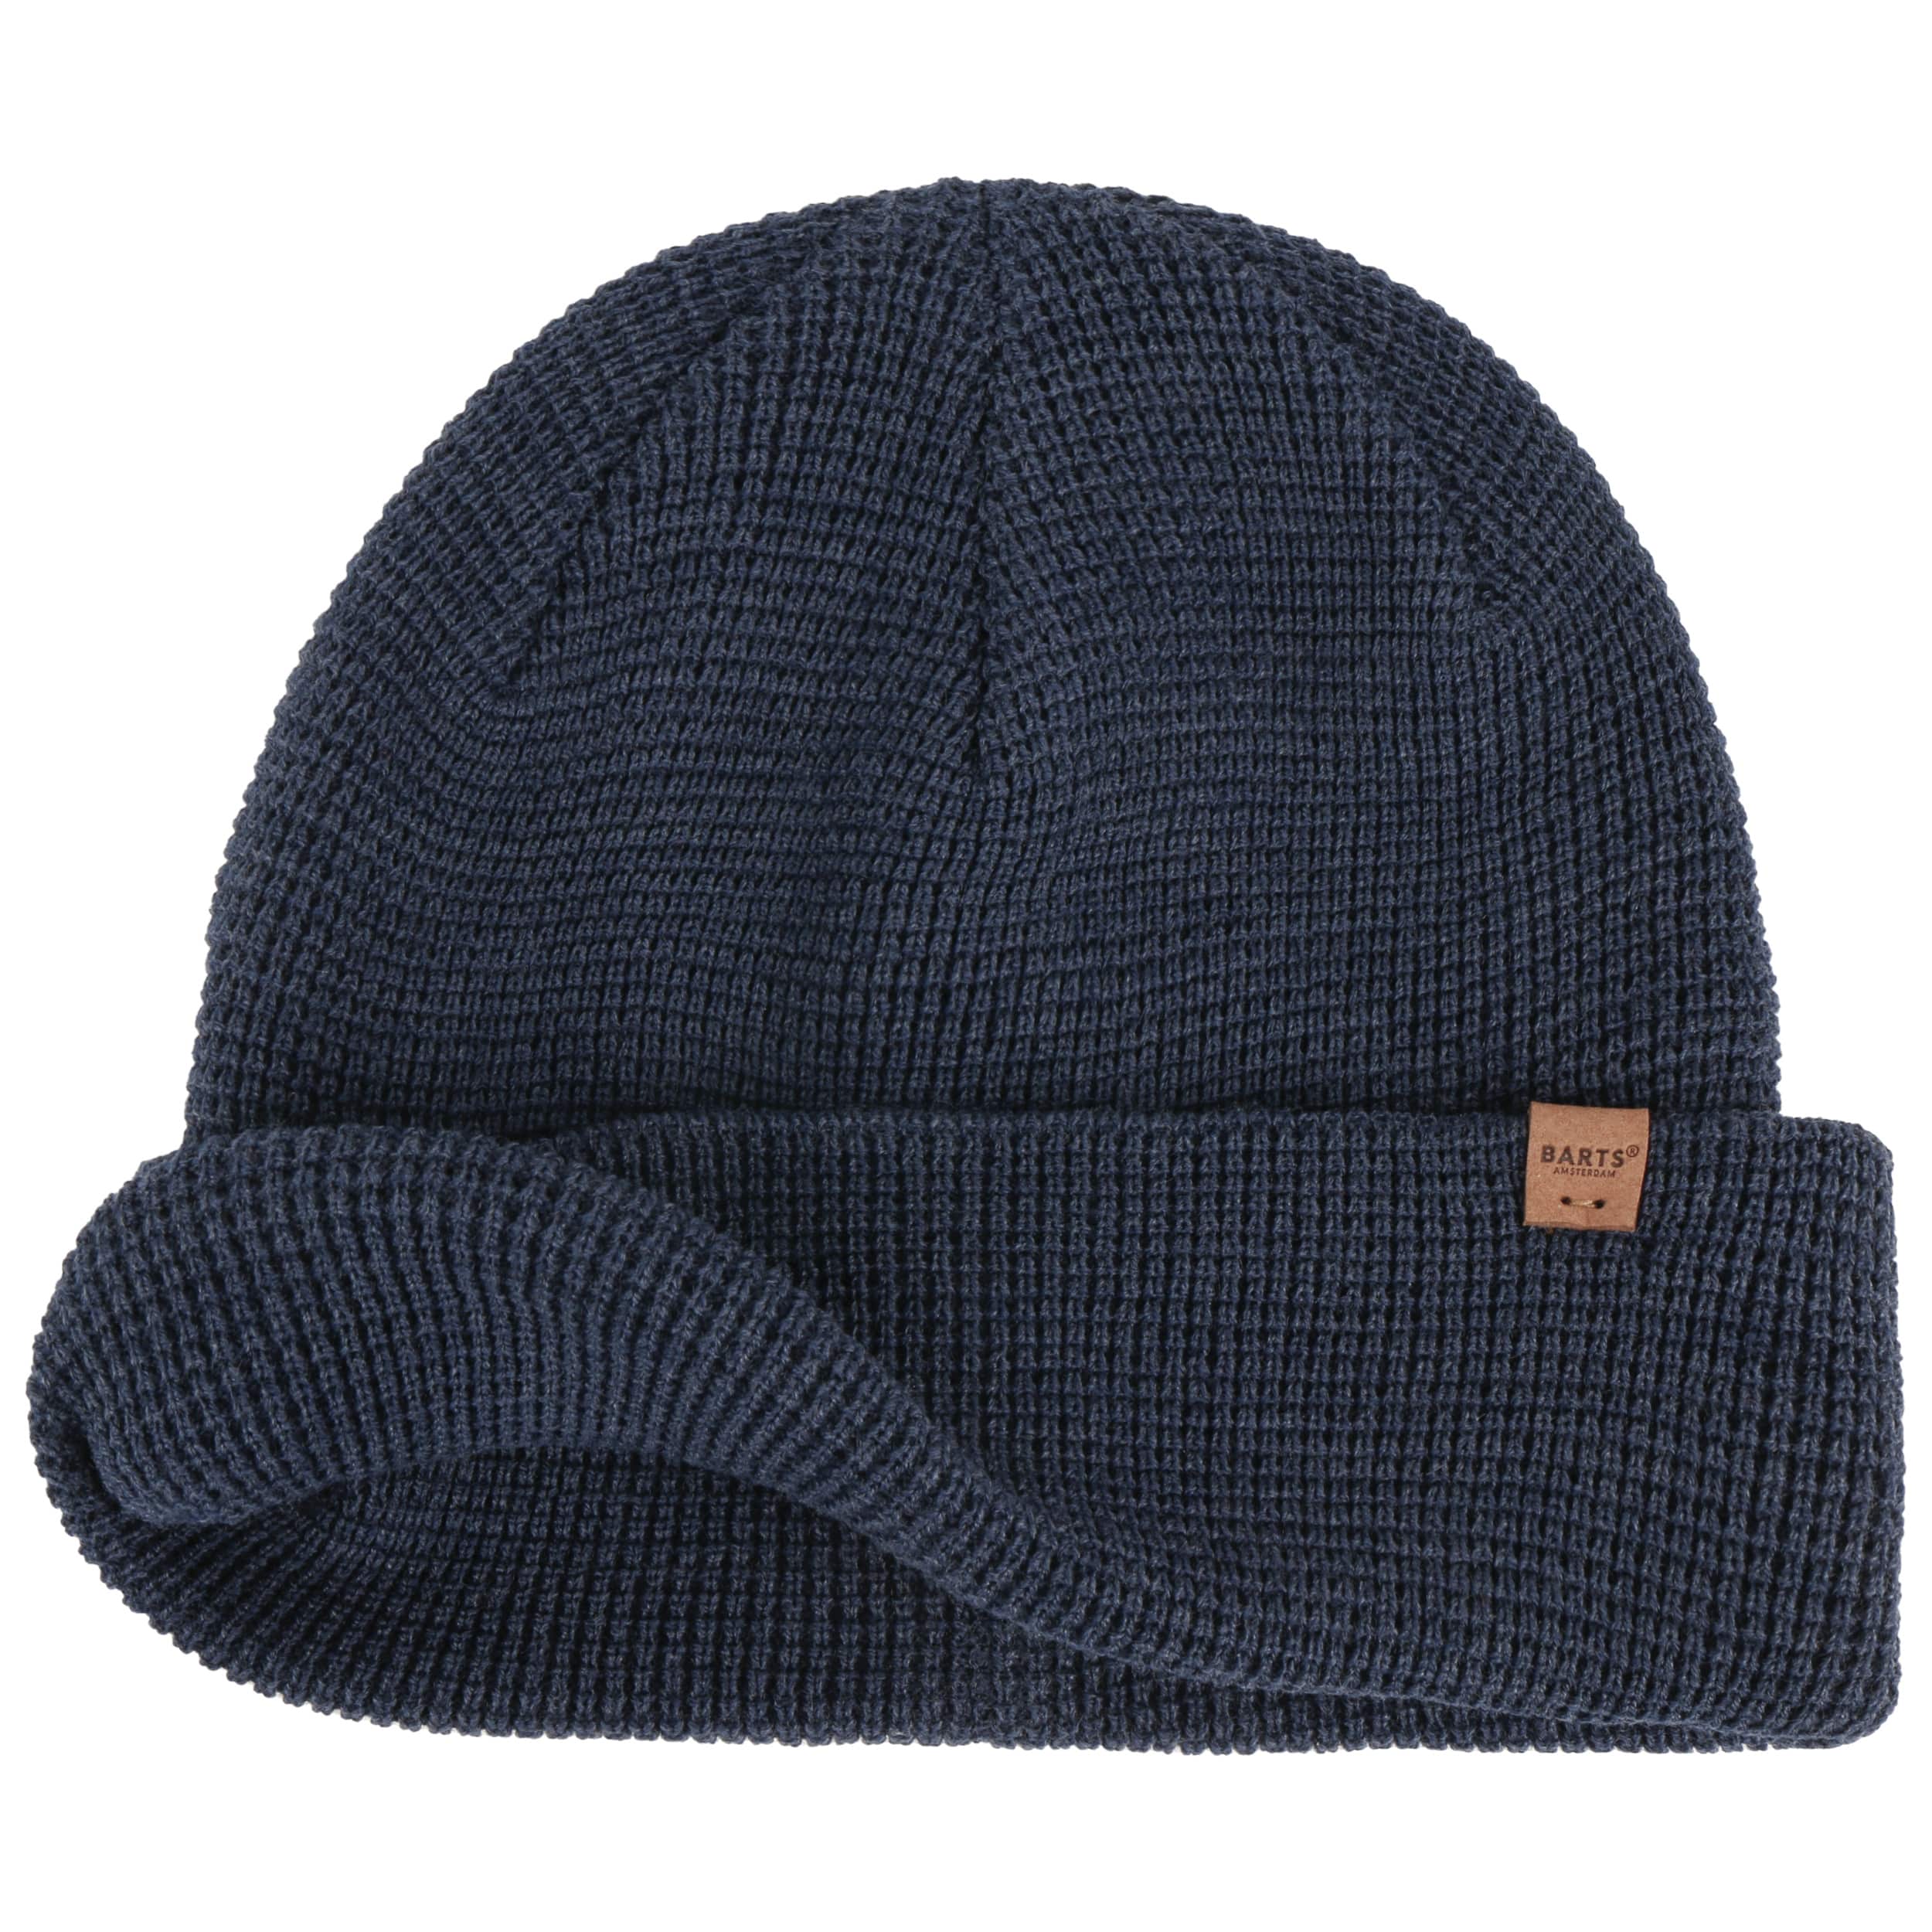 Hat Barts 22,95 Coler by £ - Beanie